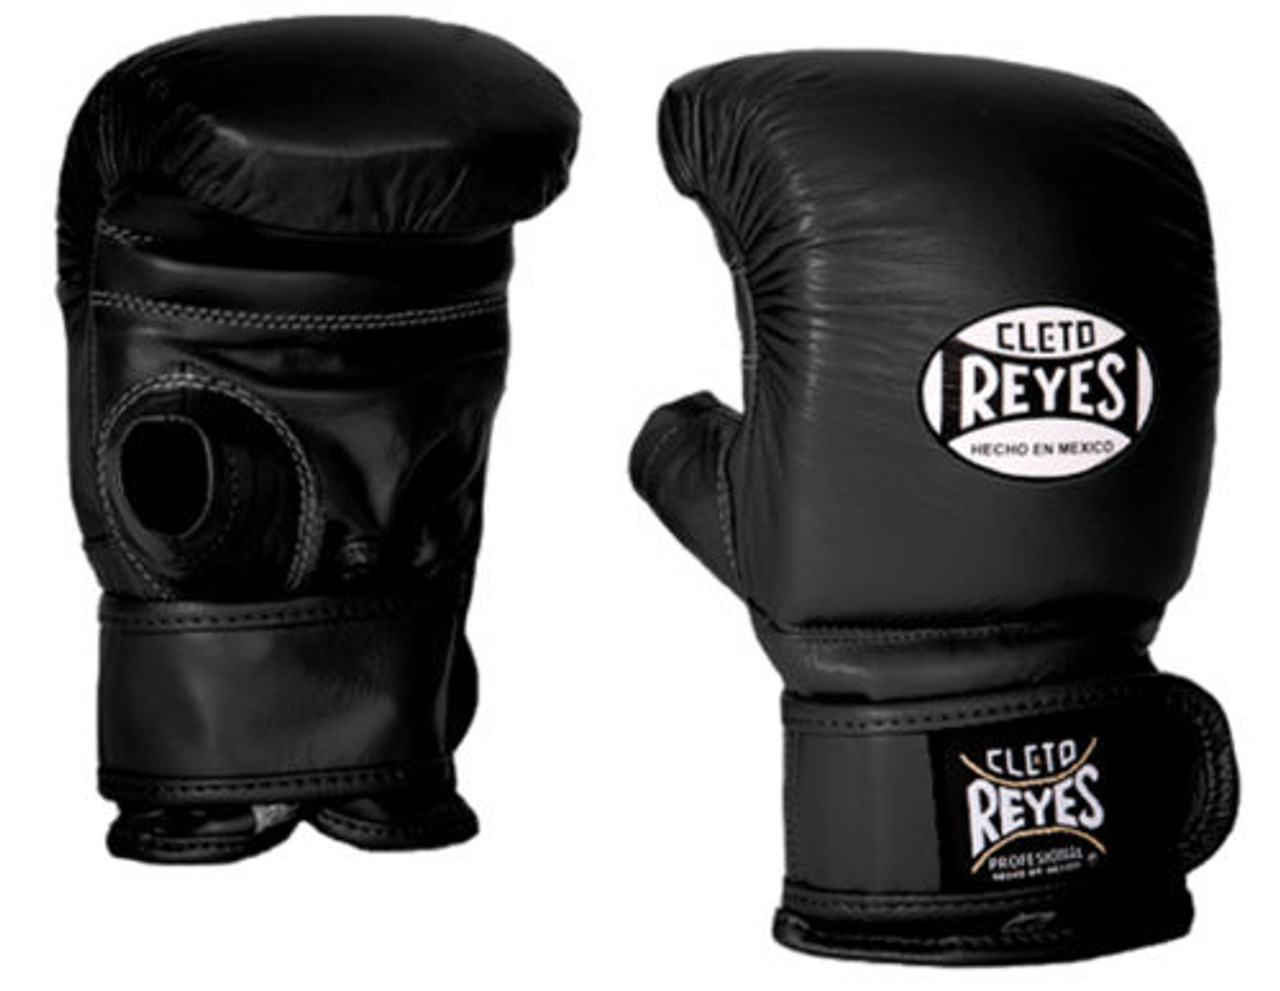 Cleto Reyes Leather Boxing Bag Gloves with Hook and Loop Closure